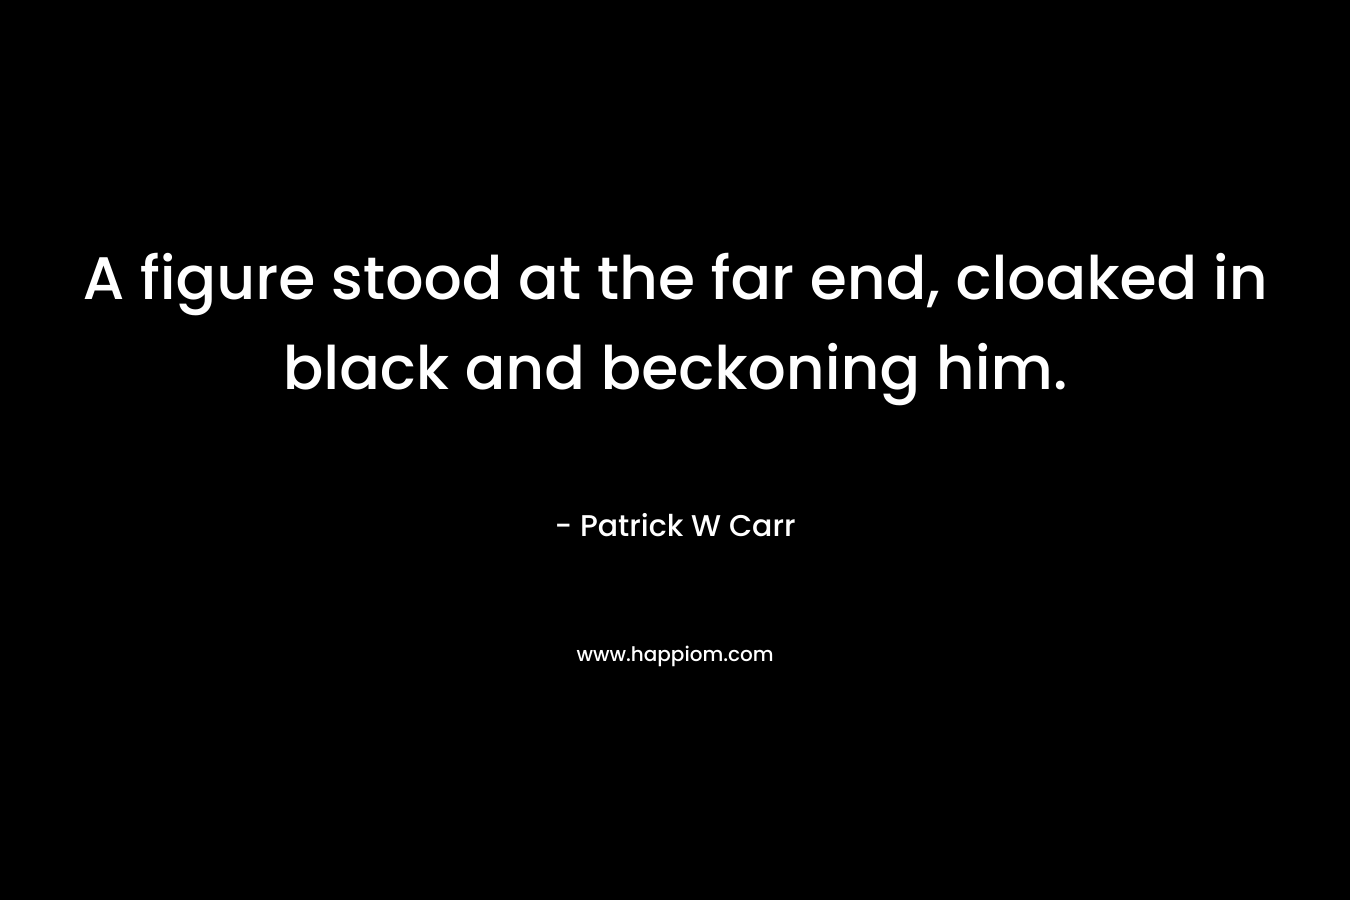 A figure stood at the far end, cloaked in black and beckoning him. – Patrick W Carr